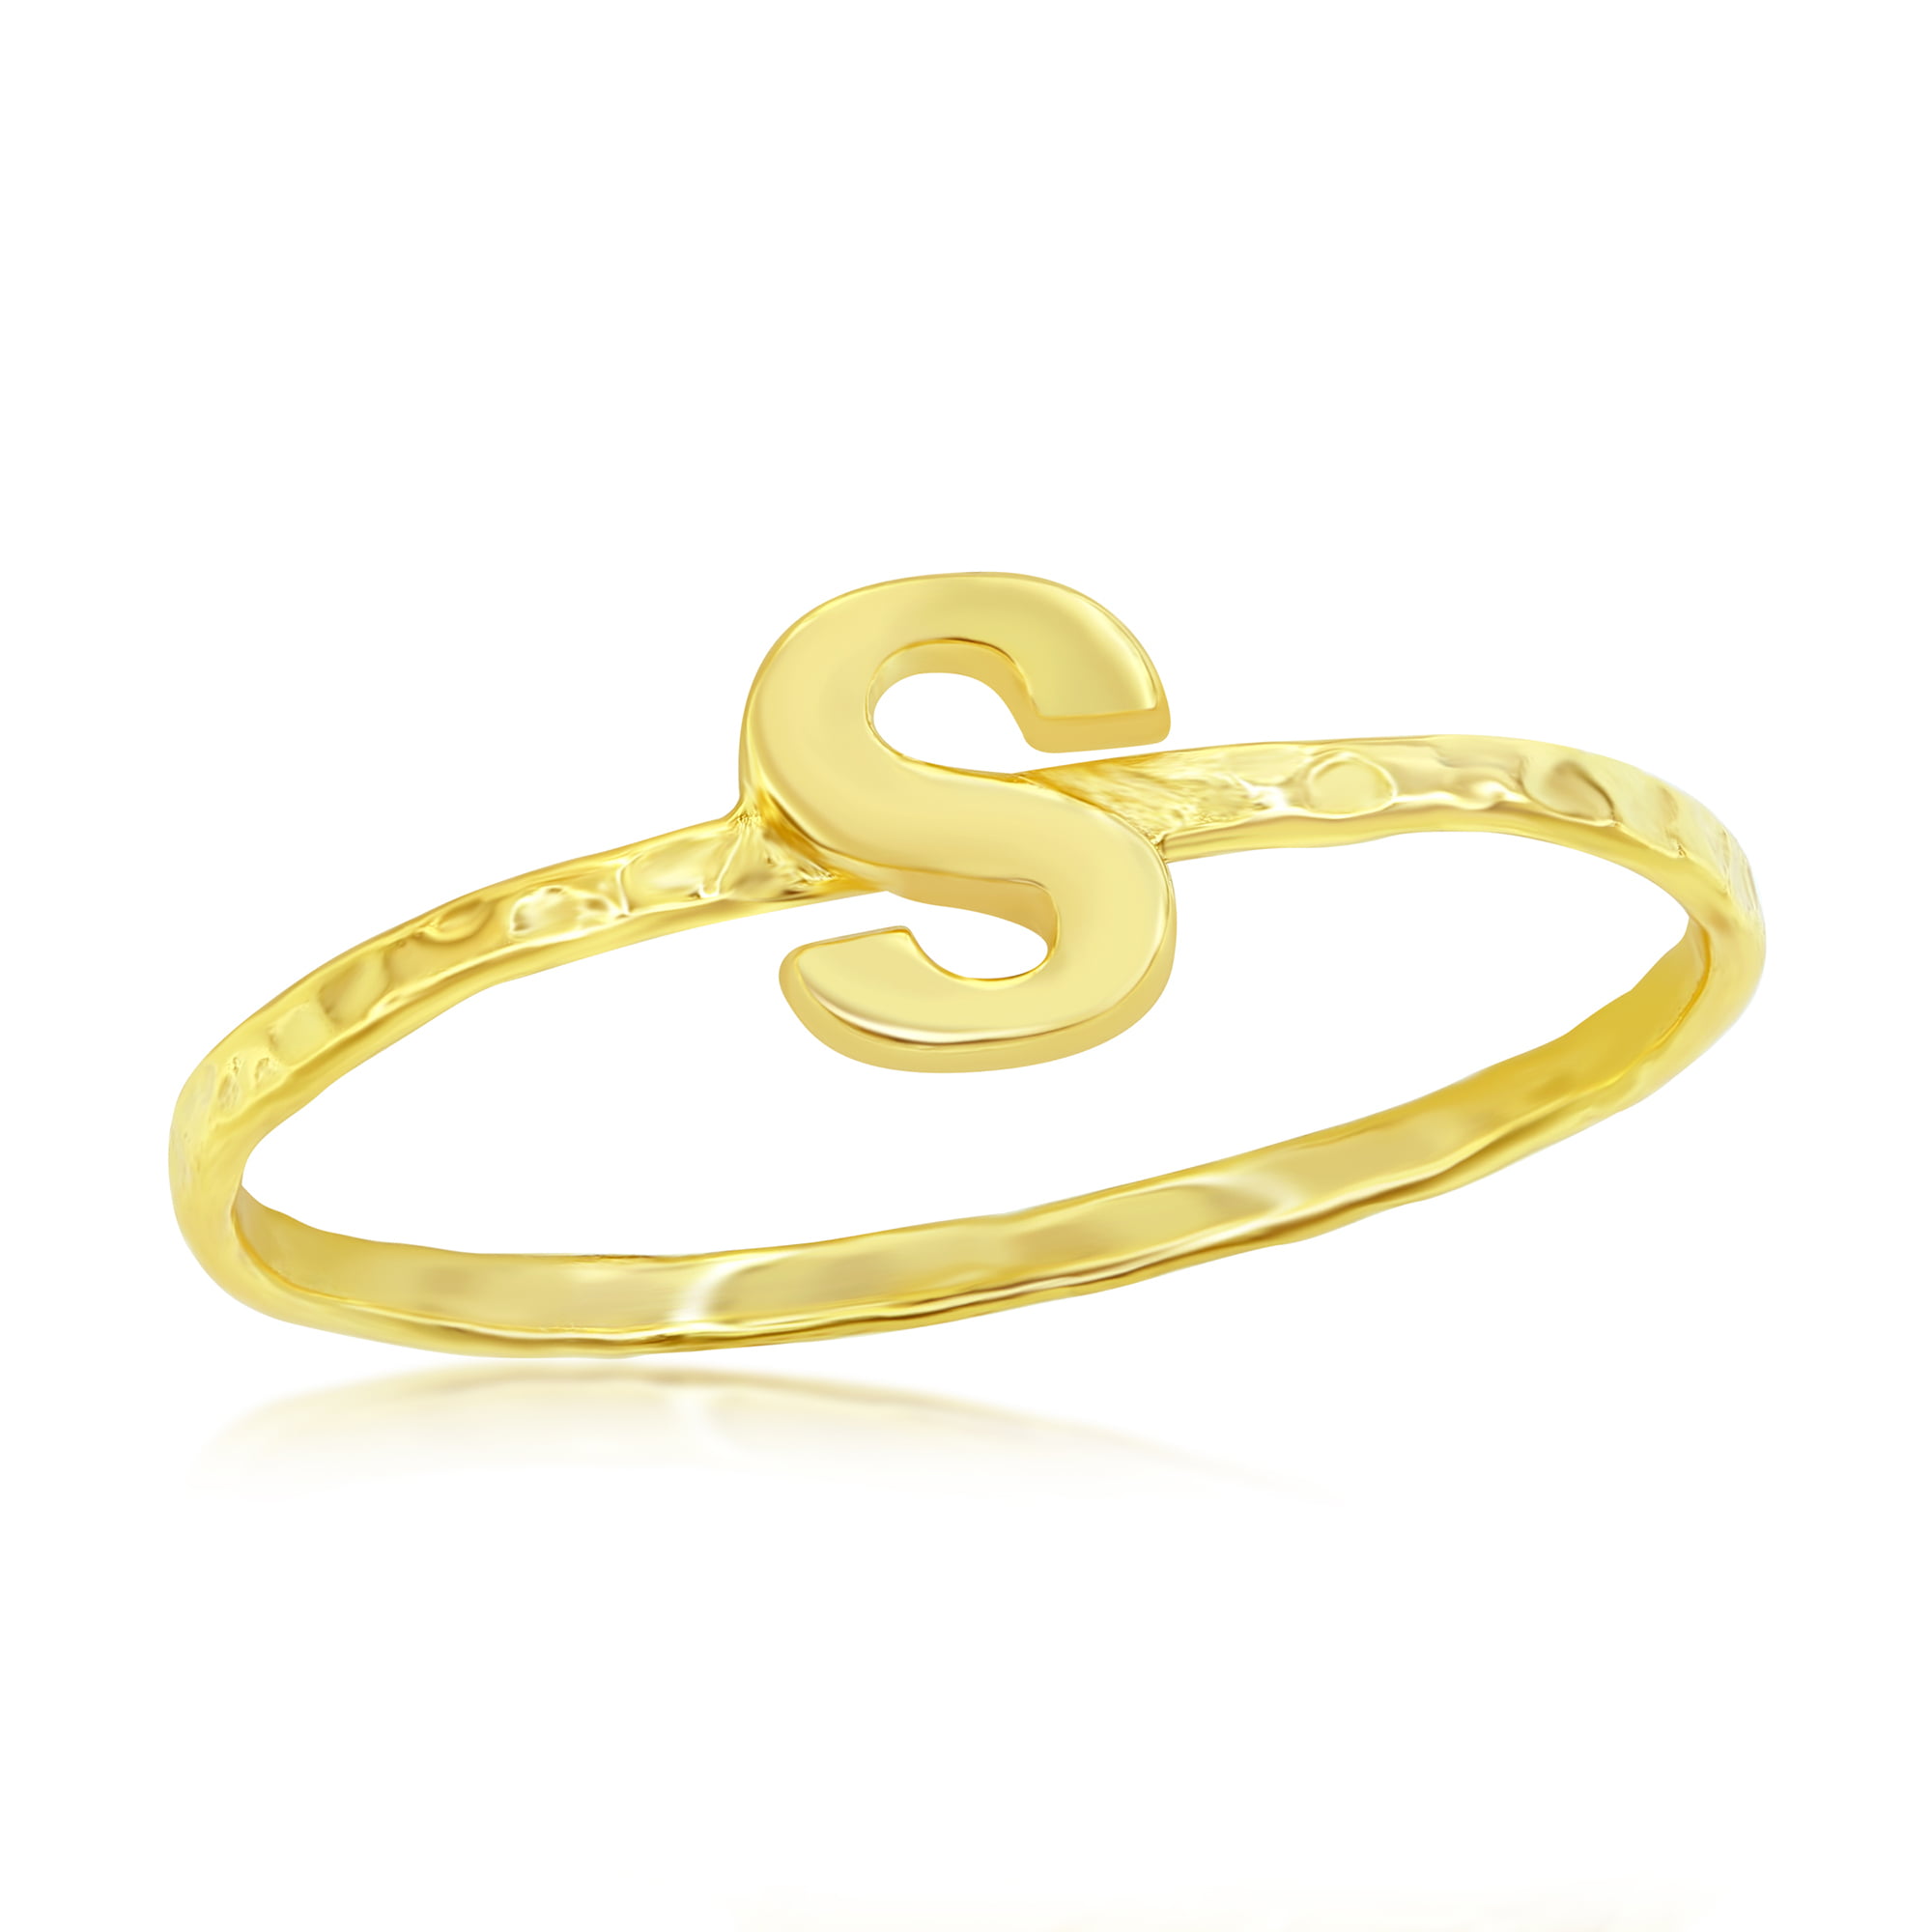 Arabic Style Zircon Arabic Letter Rings For Short Fingers For Women  Fashionable Glass Square Jewelry Accessory For Parties 230506 From Mala84,  $13.75 | DHgate.Com